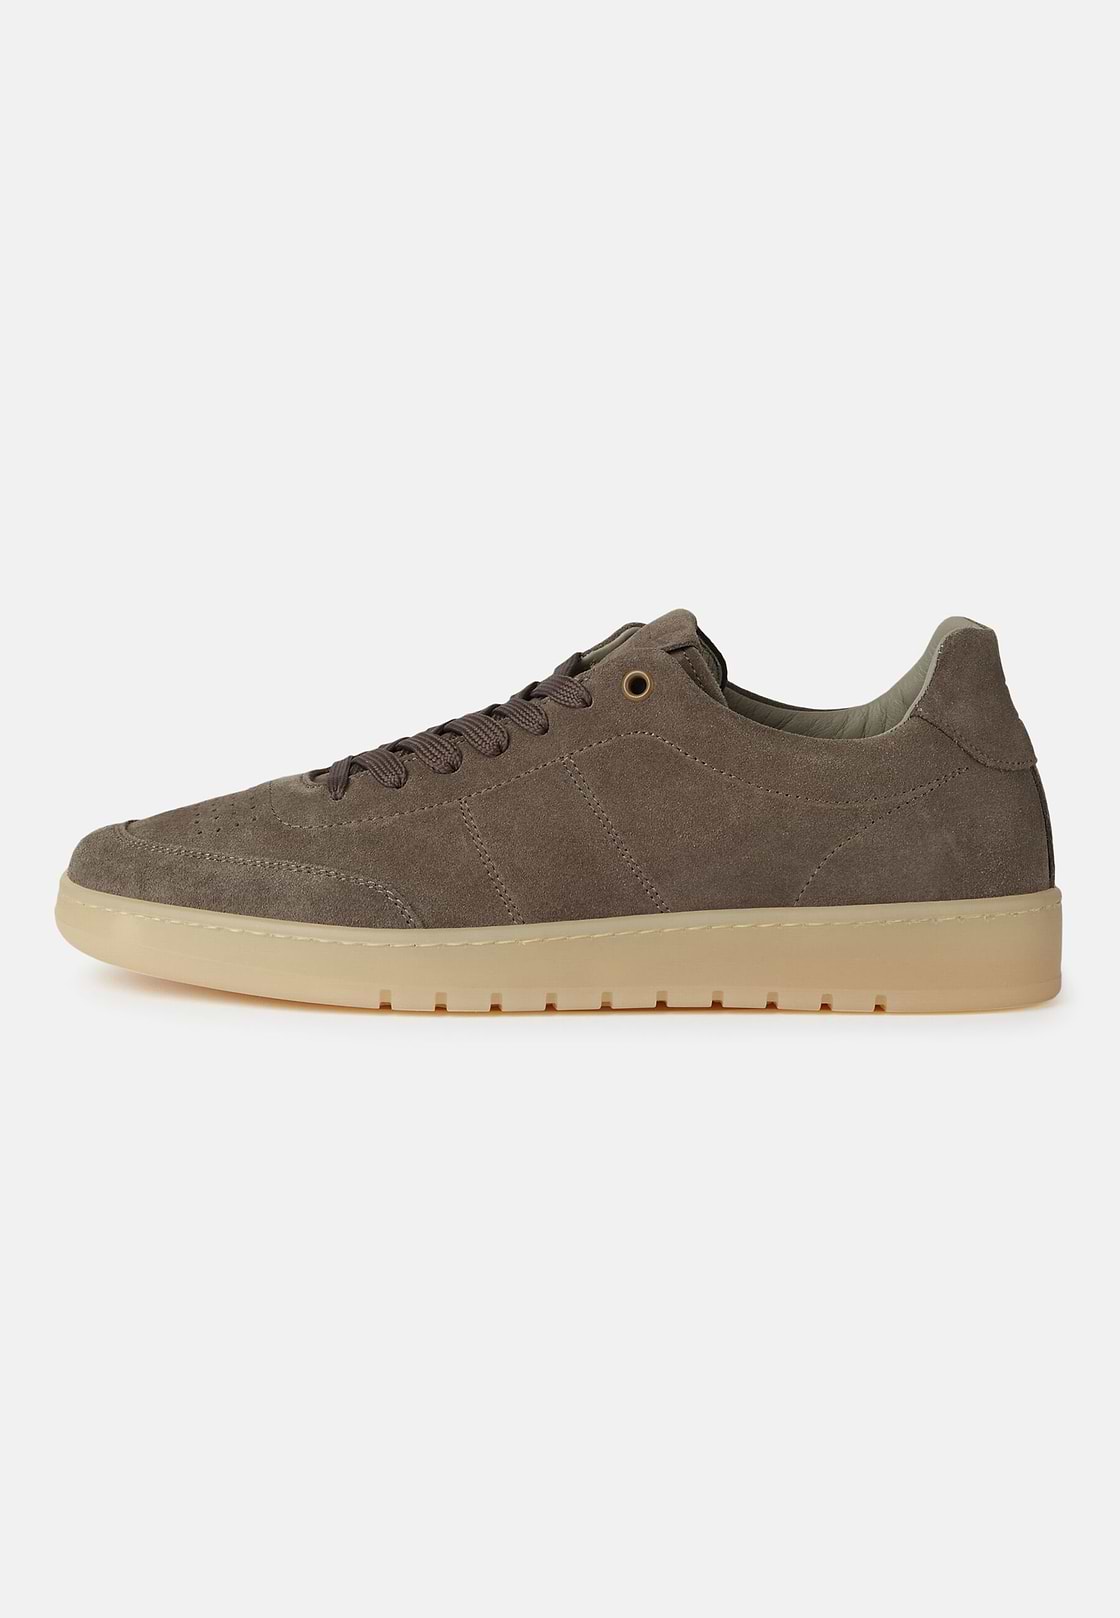 Taupe Suede Trainers, Taupe, hi-res